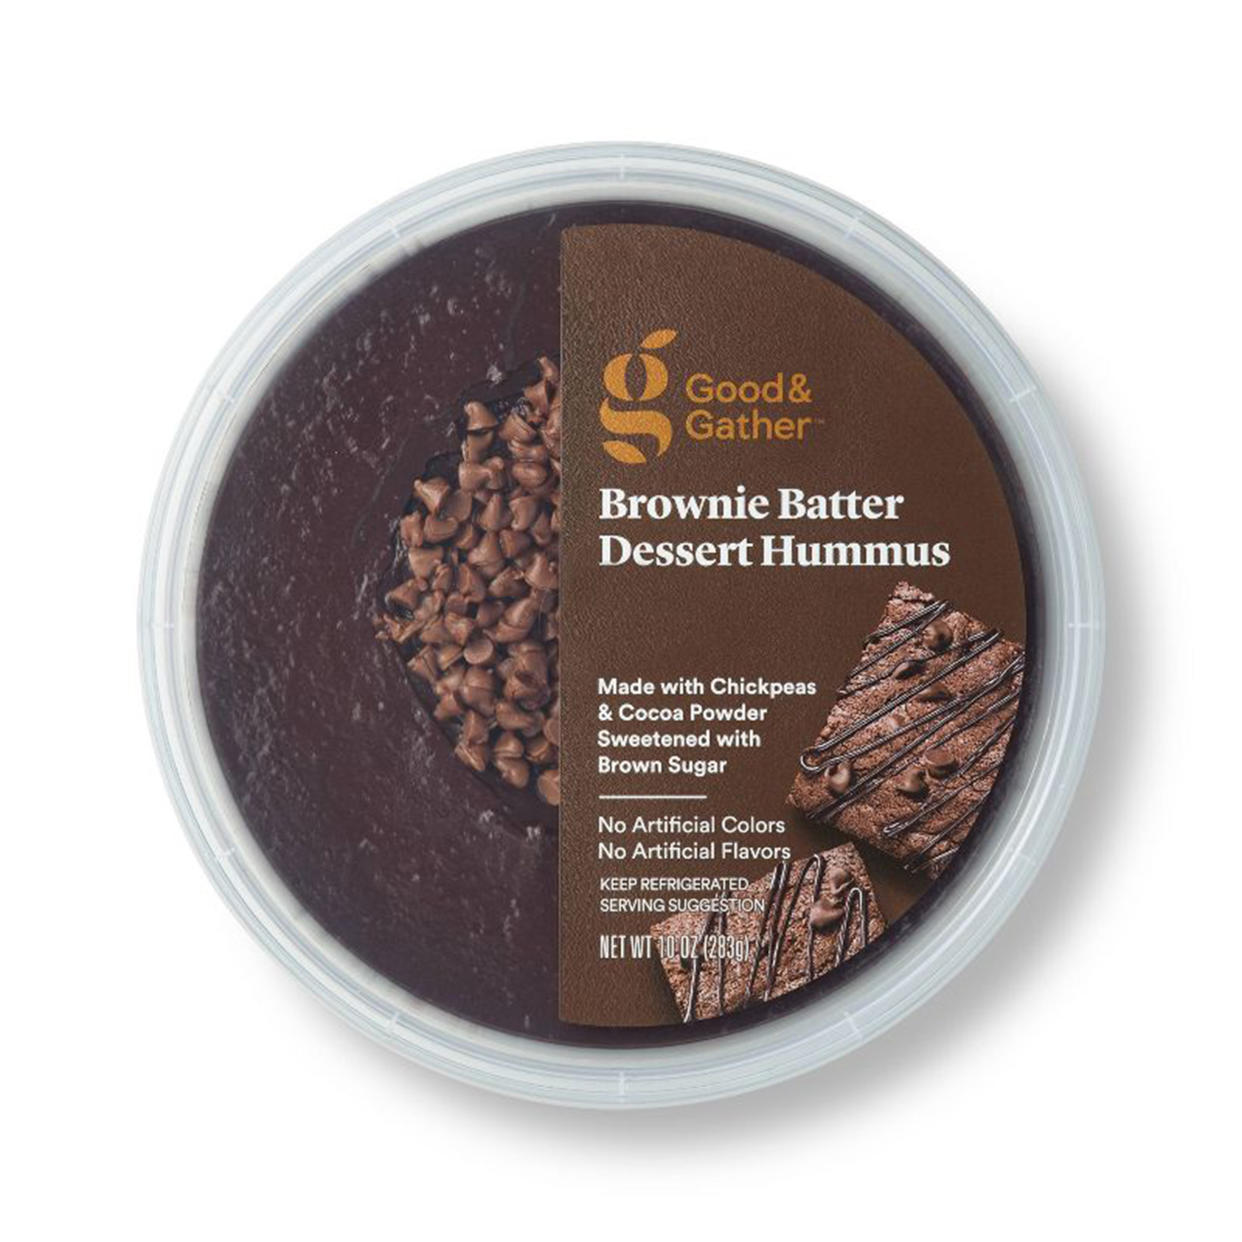 Good & Gather’s Brownie Batter Hummus is just one of several chocolate dessert hummus options out there. (Good & Gather)